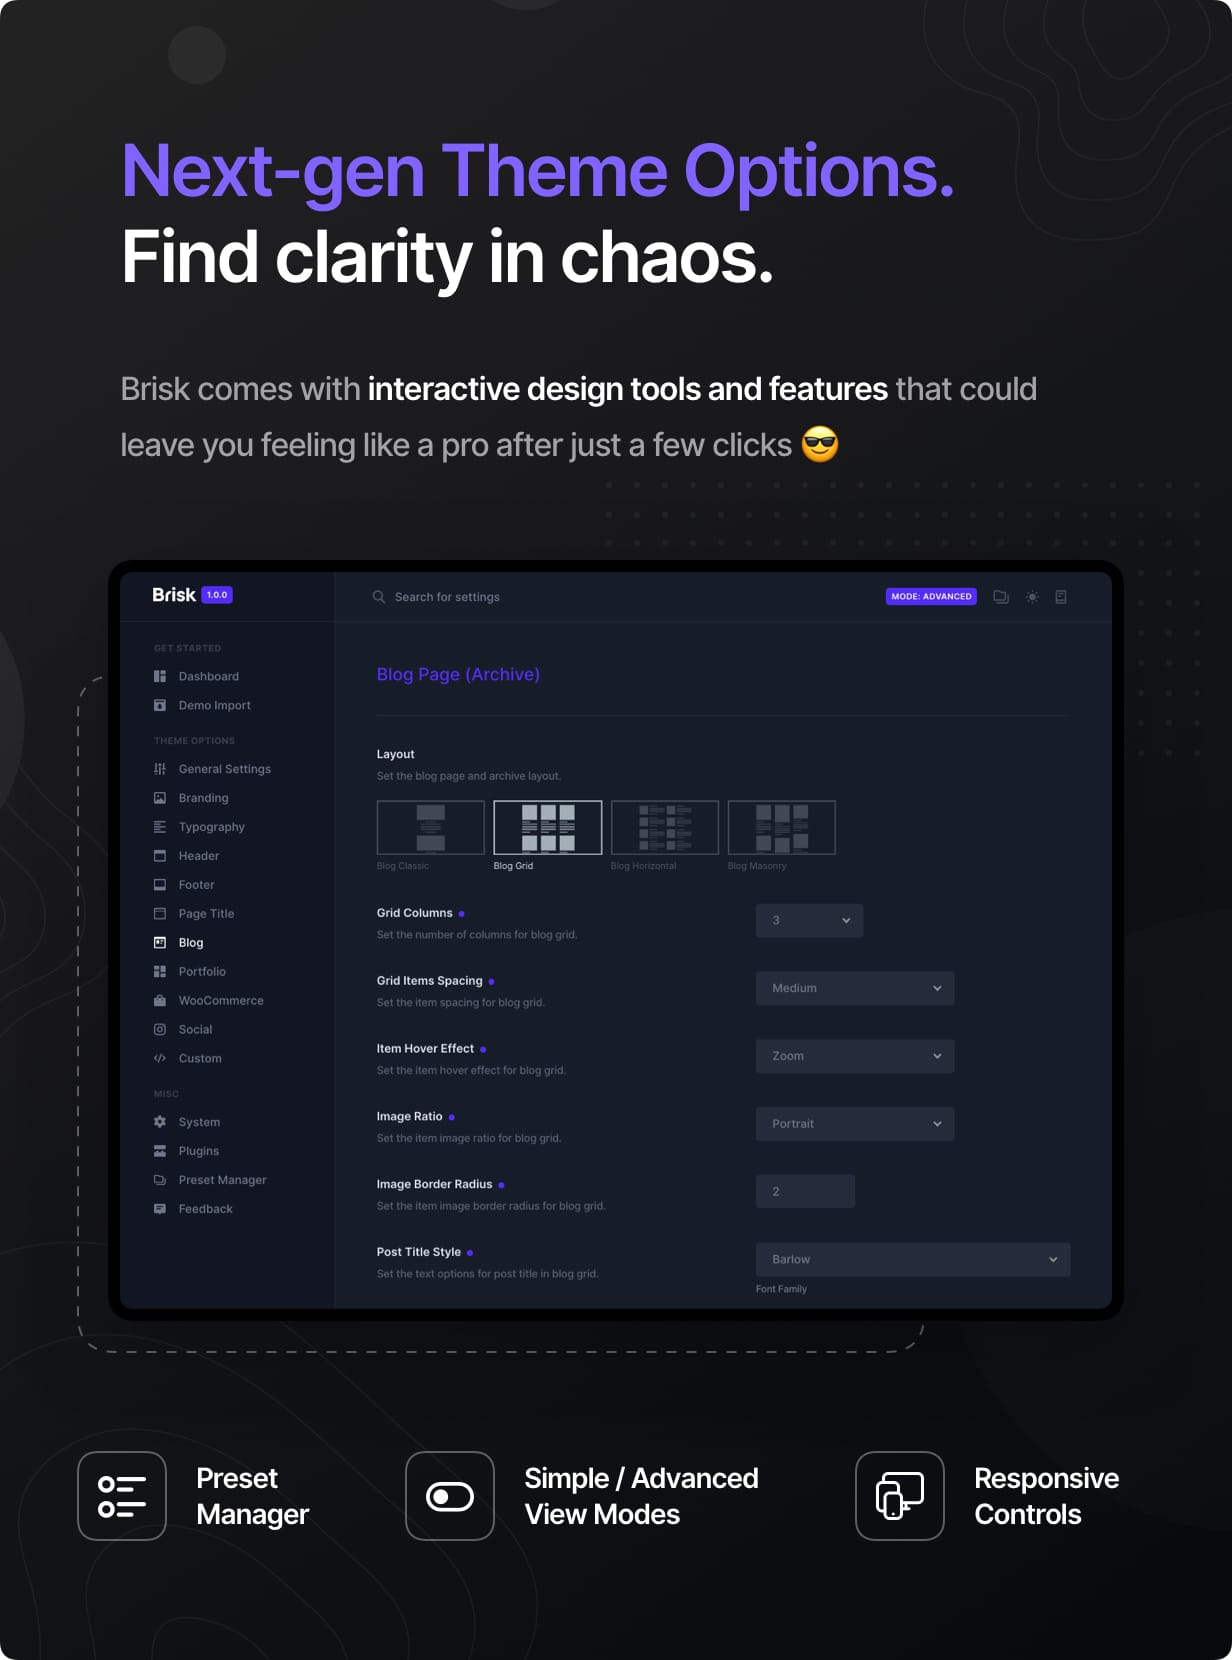 Next-gen Theme Options. Find clarity in chaos.